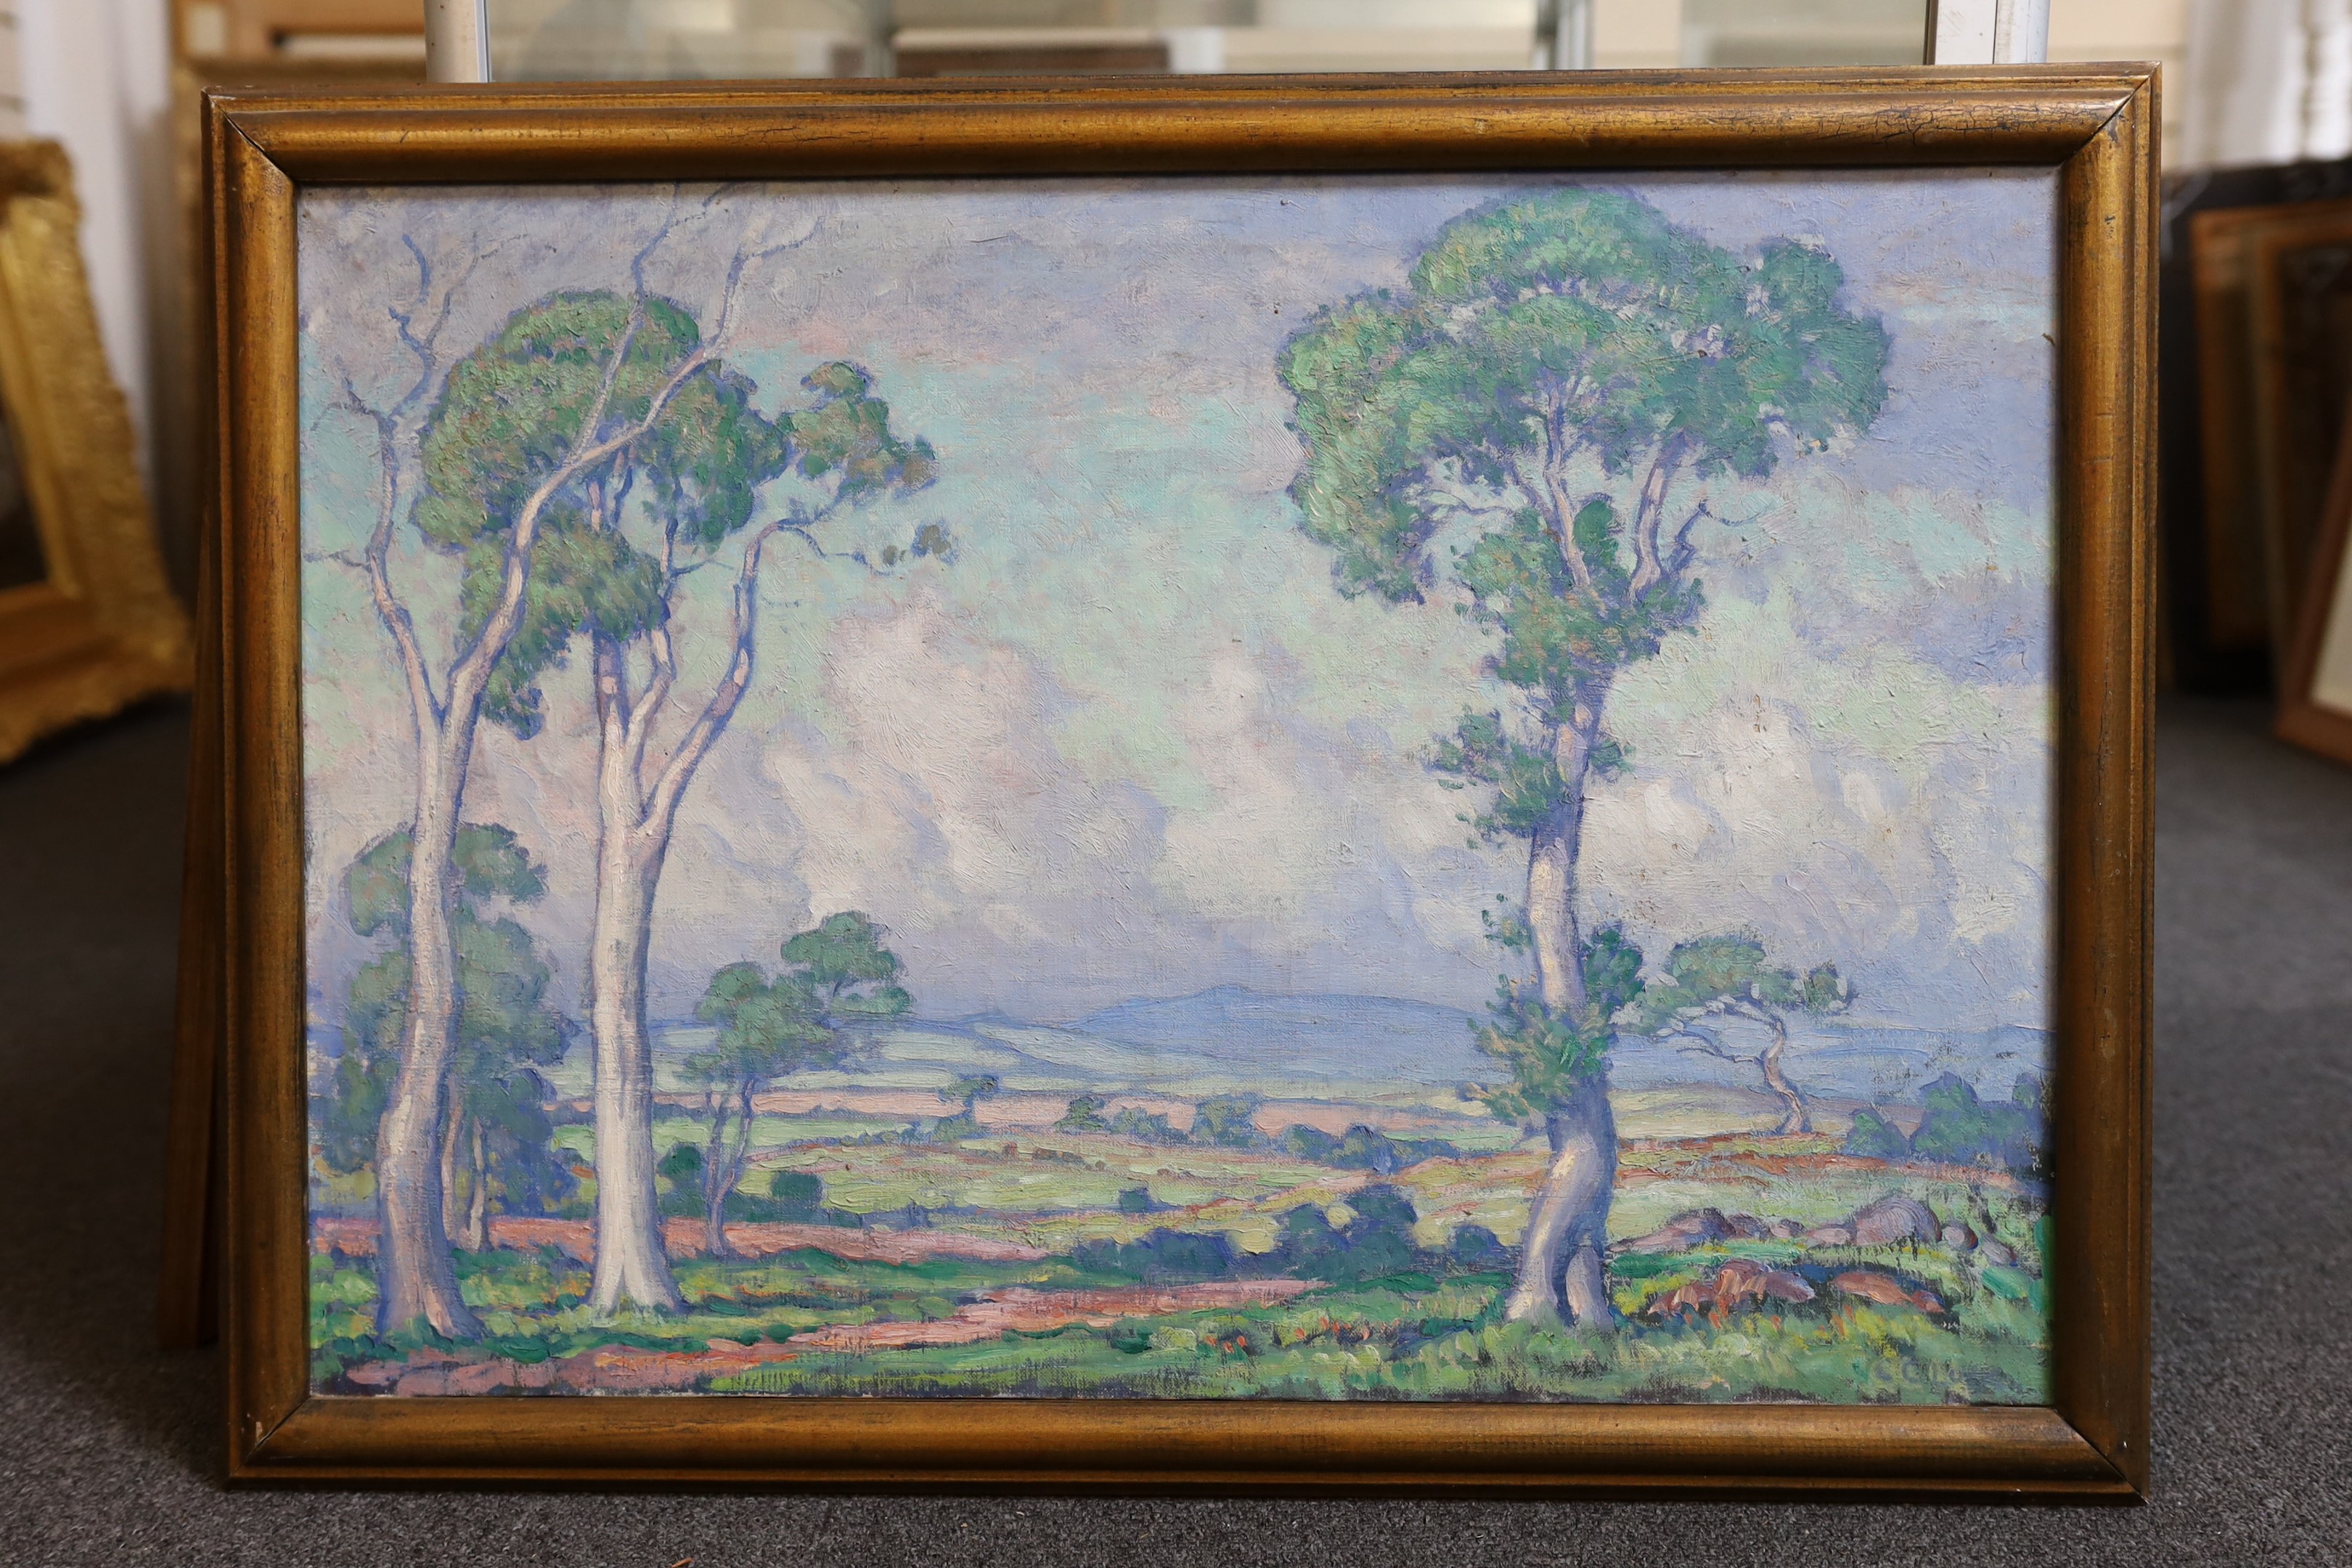 CCL , Open landscape with trees to the foreground, possibly Australia with eucalyptus trees, oil on canvas, 45 x 64cm